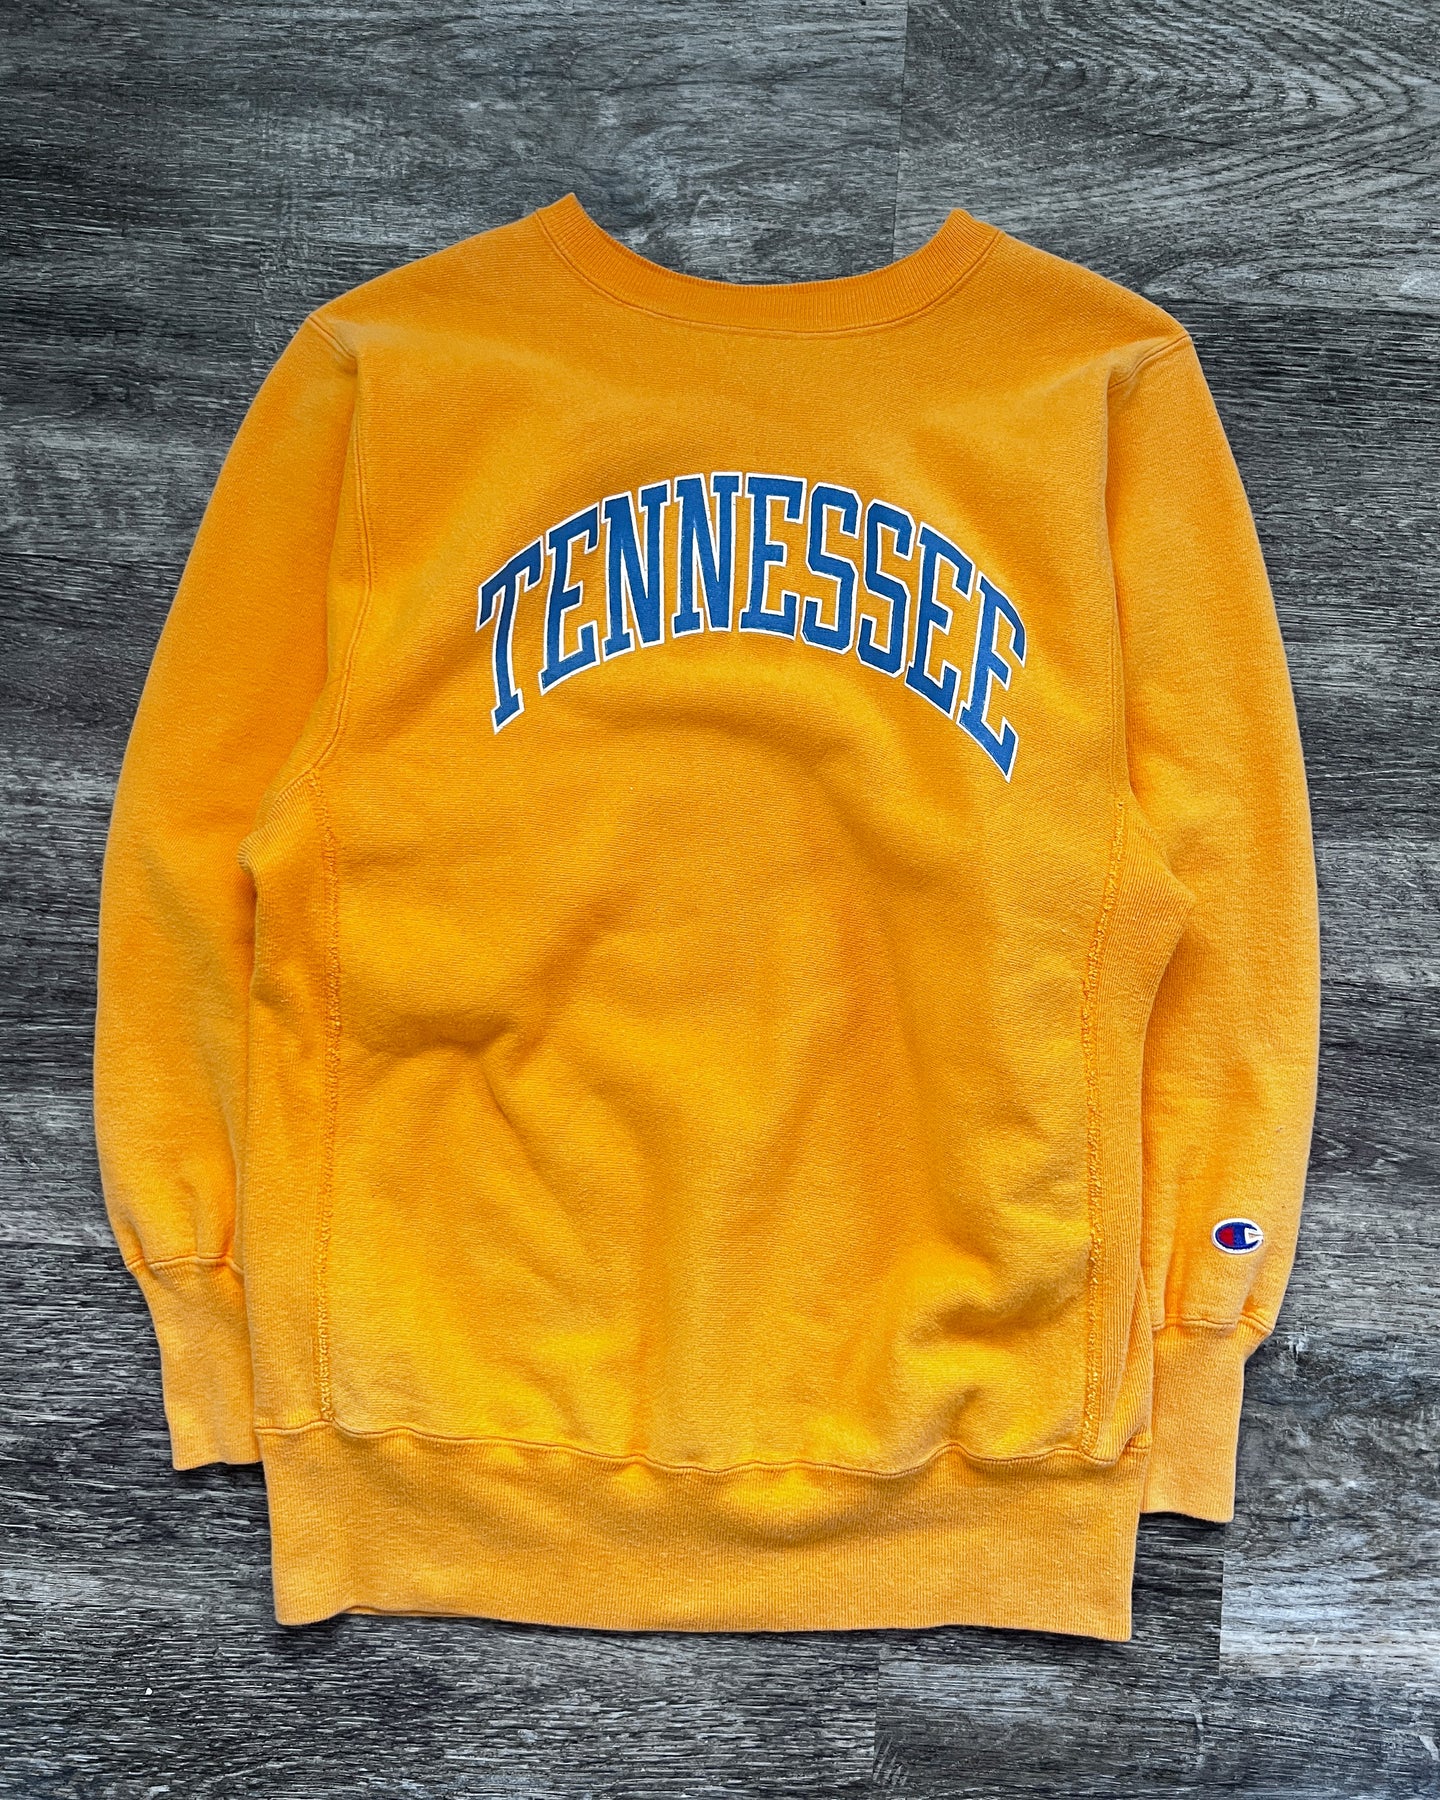 1990s Tennessee Champion Reverse Weave Crewneck - Size Large